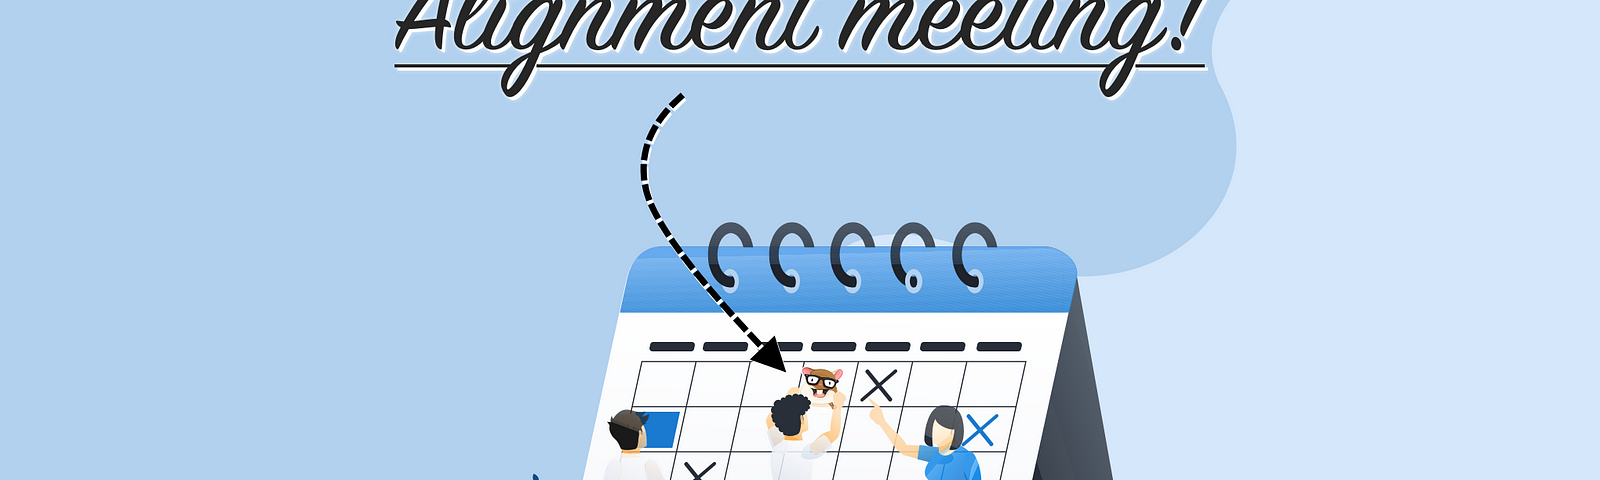 A bunch of people is adding Alignment meeting to a calendar. Instead of a regular cross icon they use Tomster’s face.